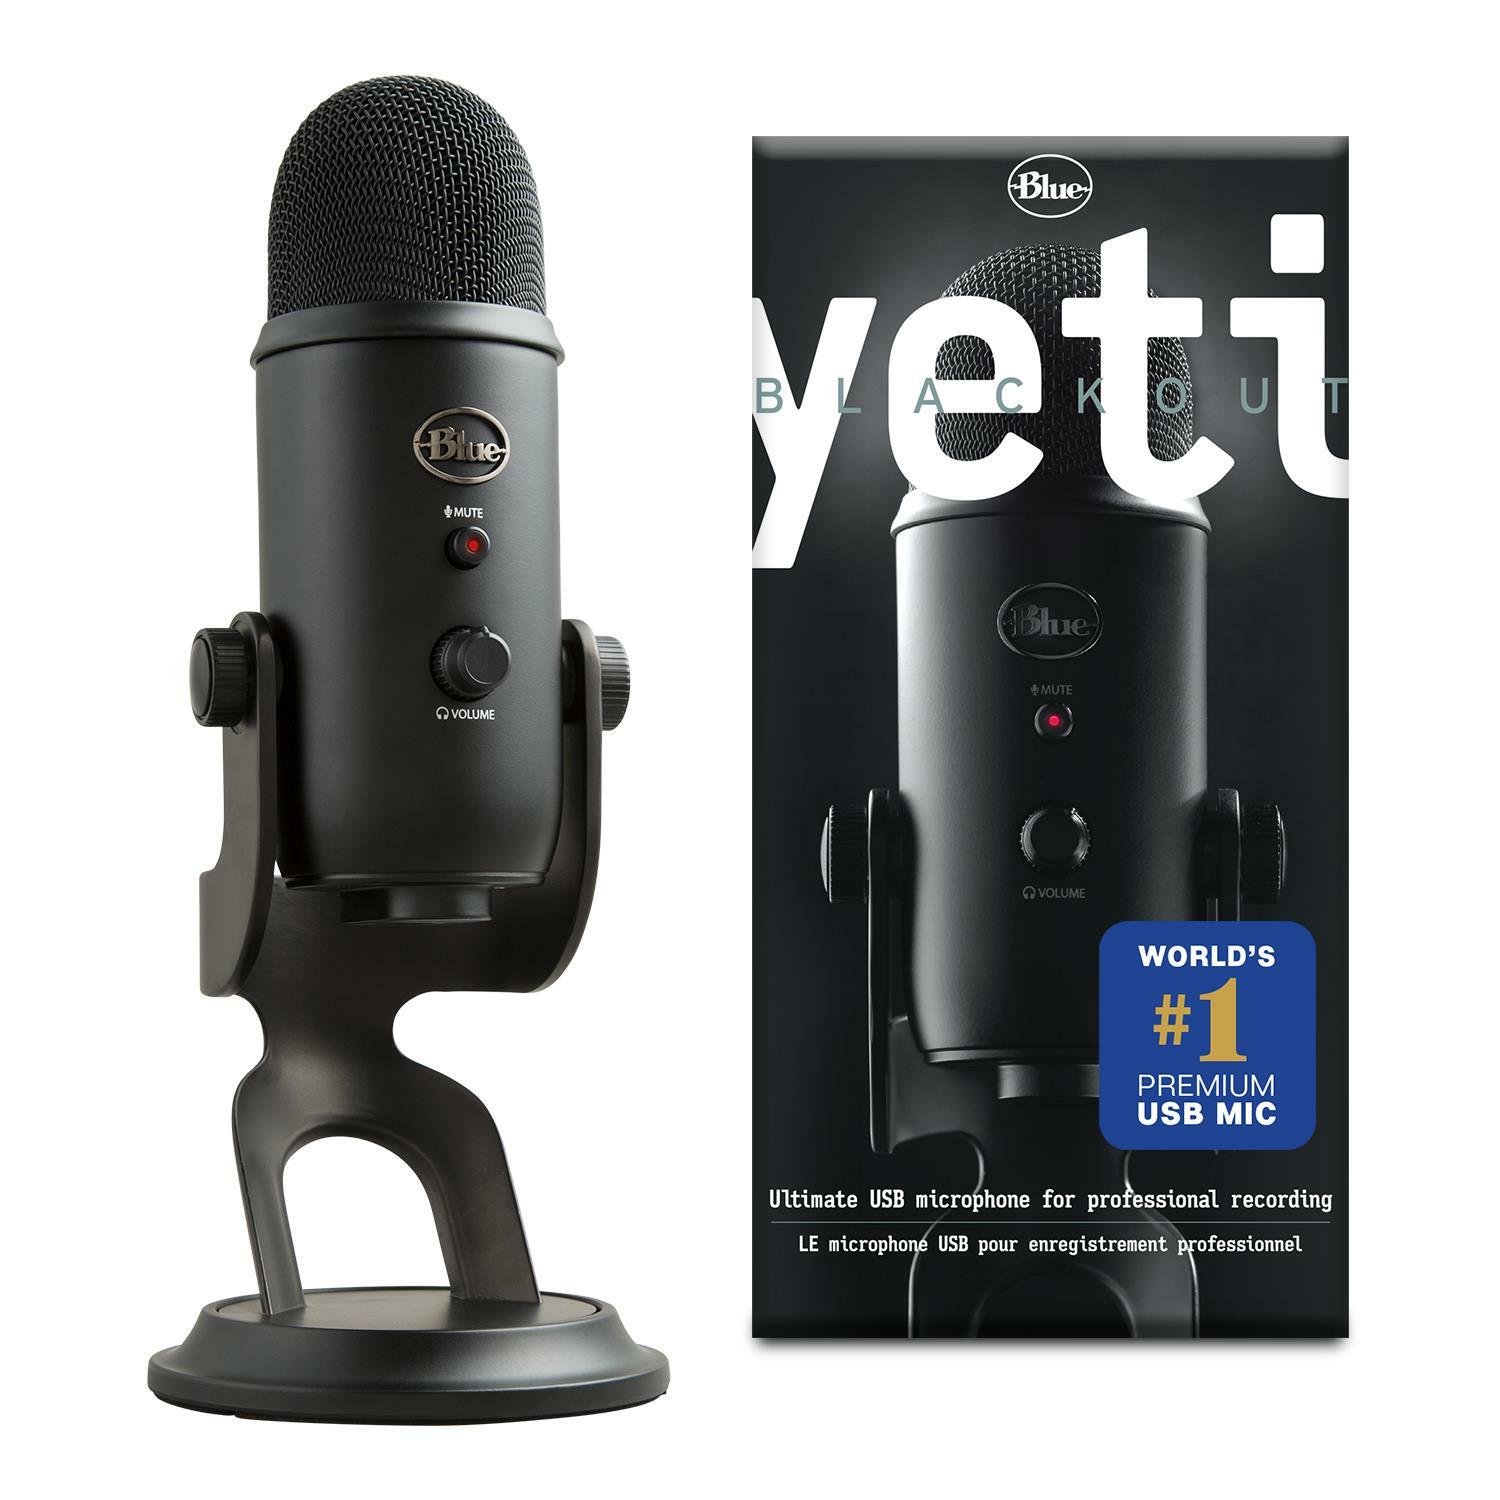 Blue Yeti USB Streaming Gaming Podcast PC Microphone - Black